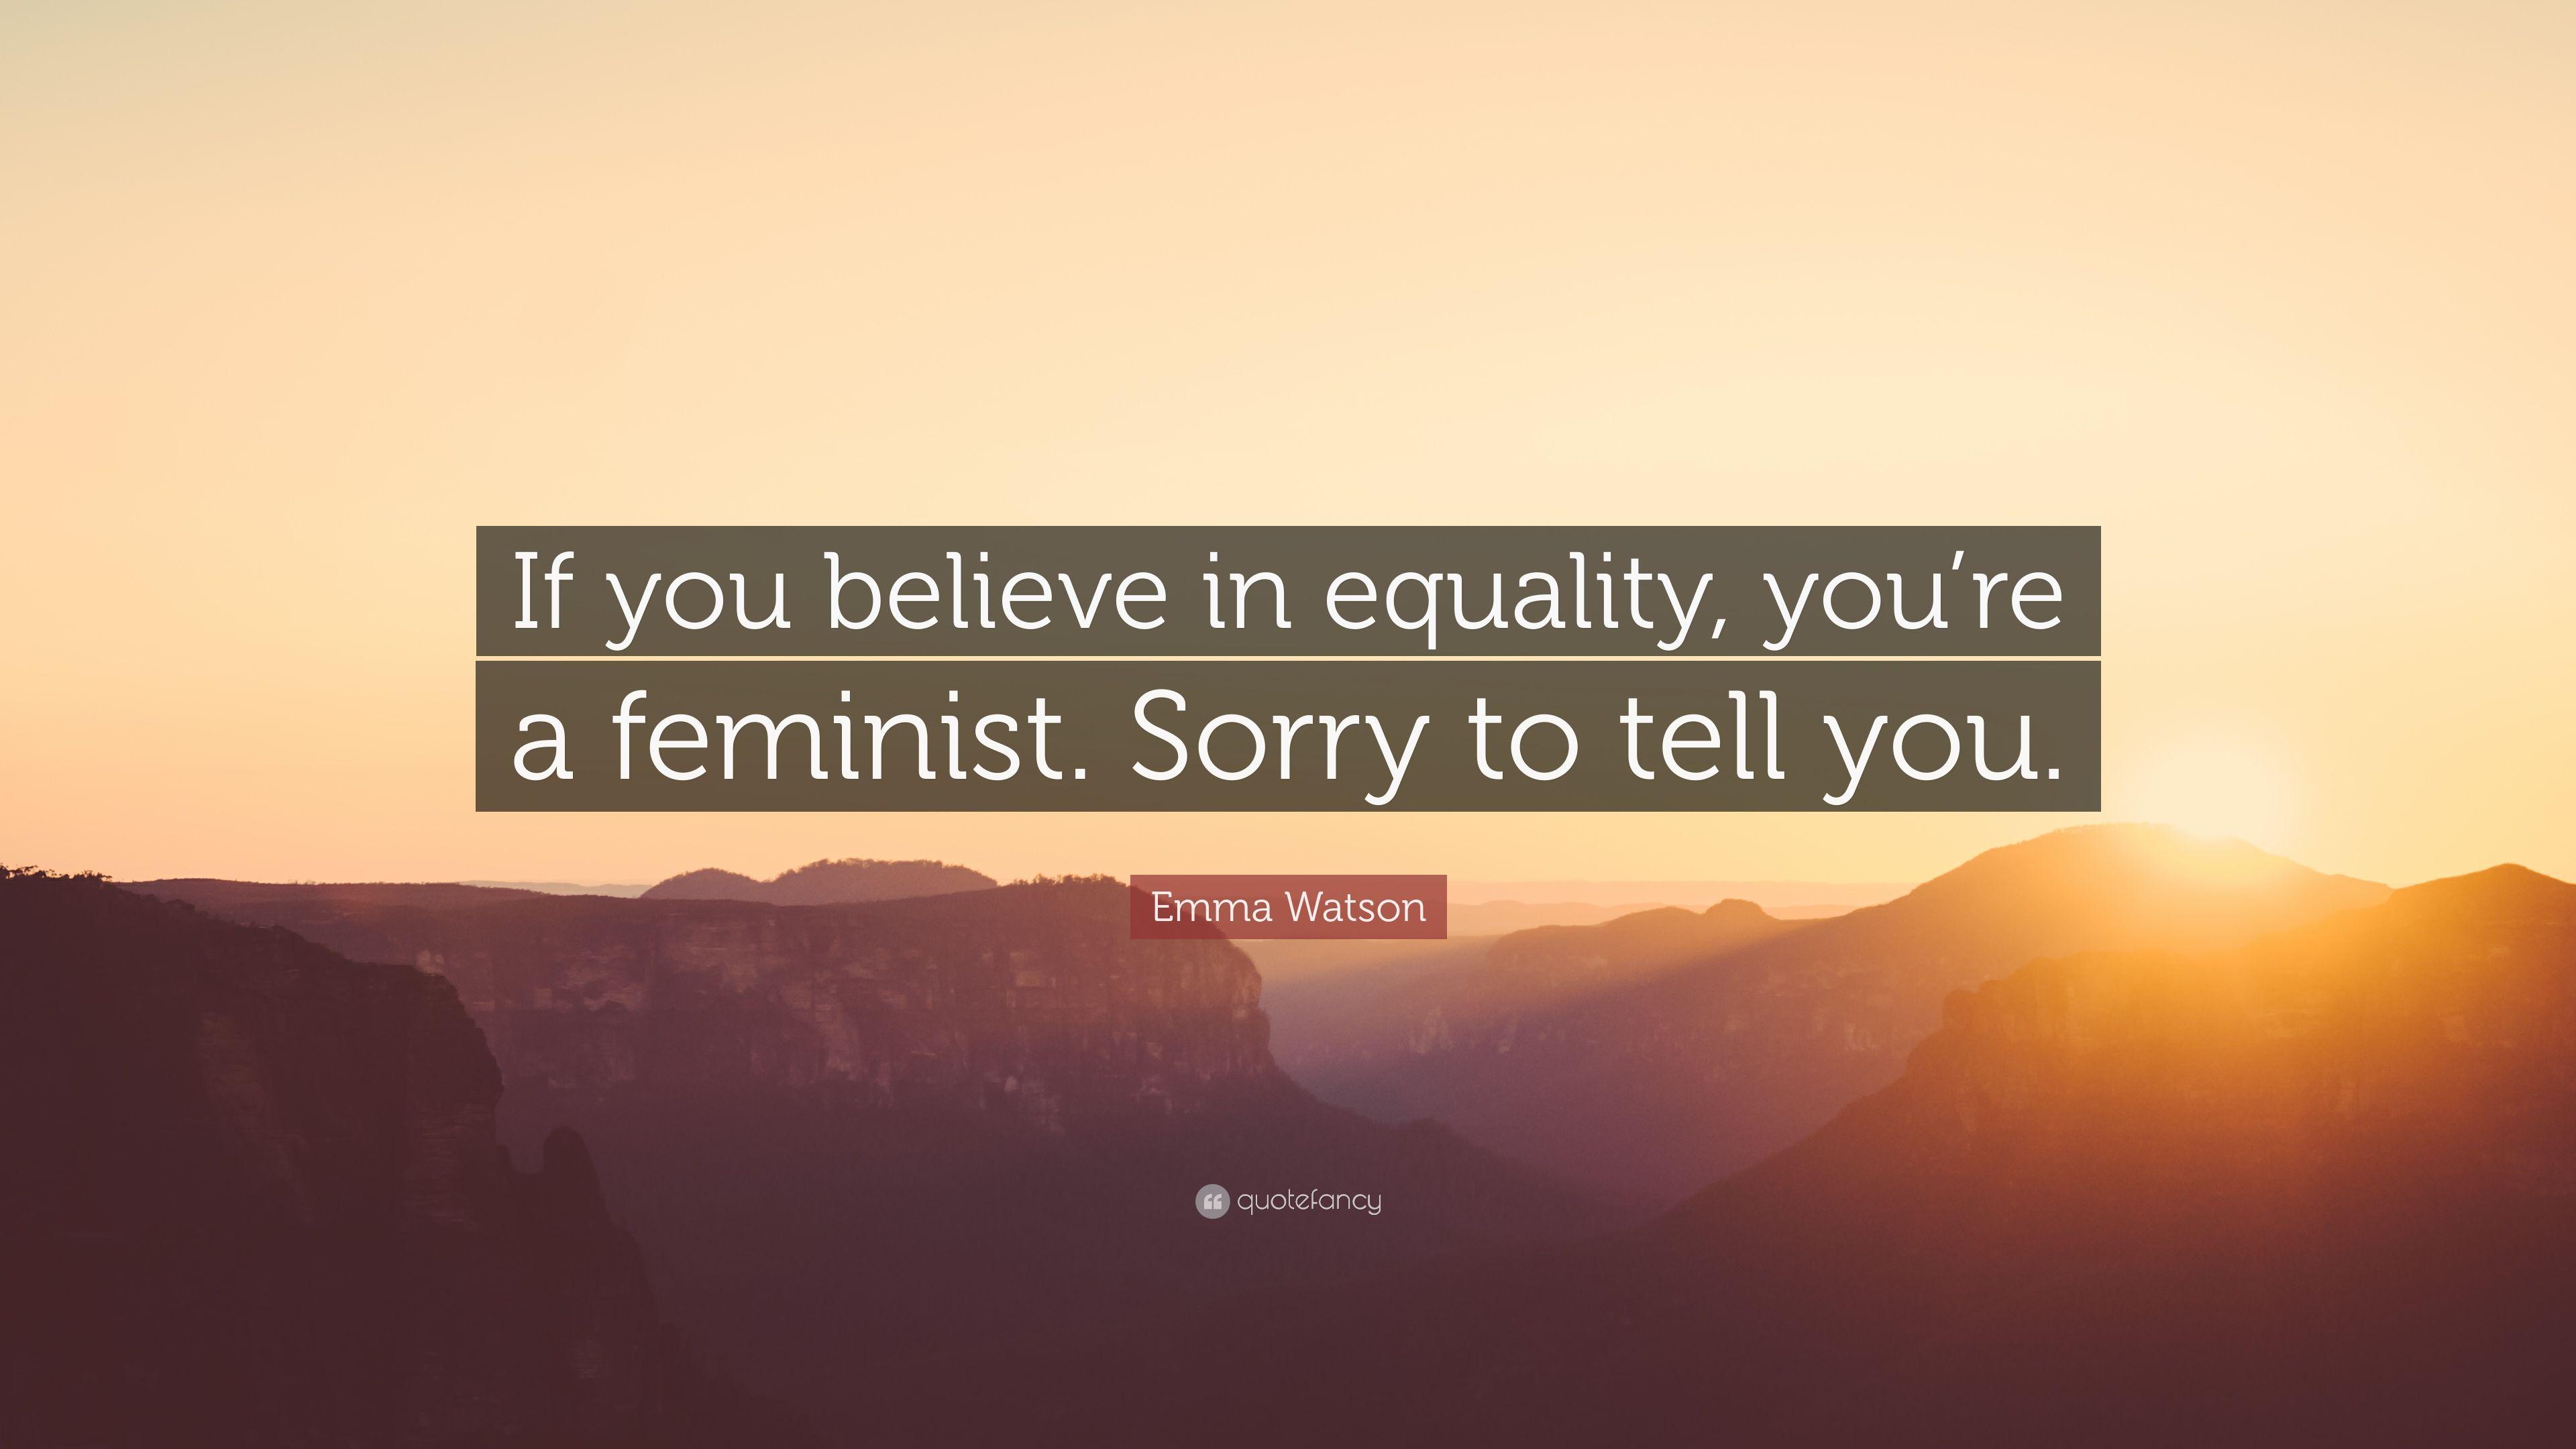 Emma Watson Quote: “If you believe in equality, you're a feminist. Sorry to tell you.”